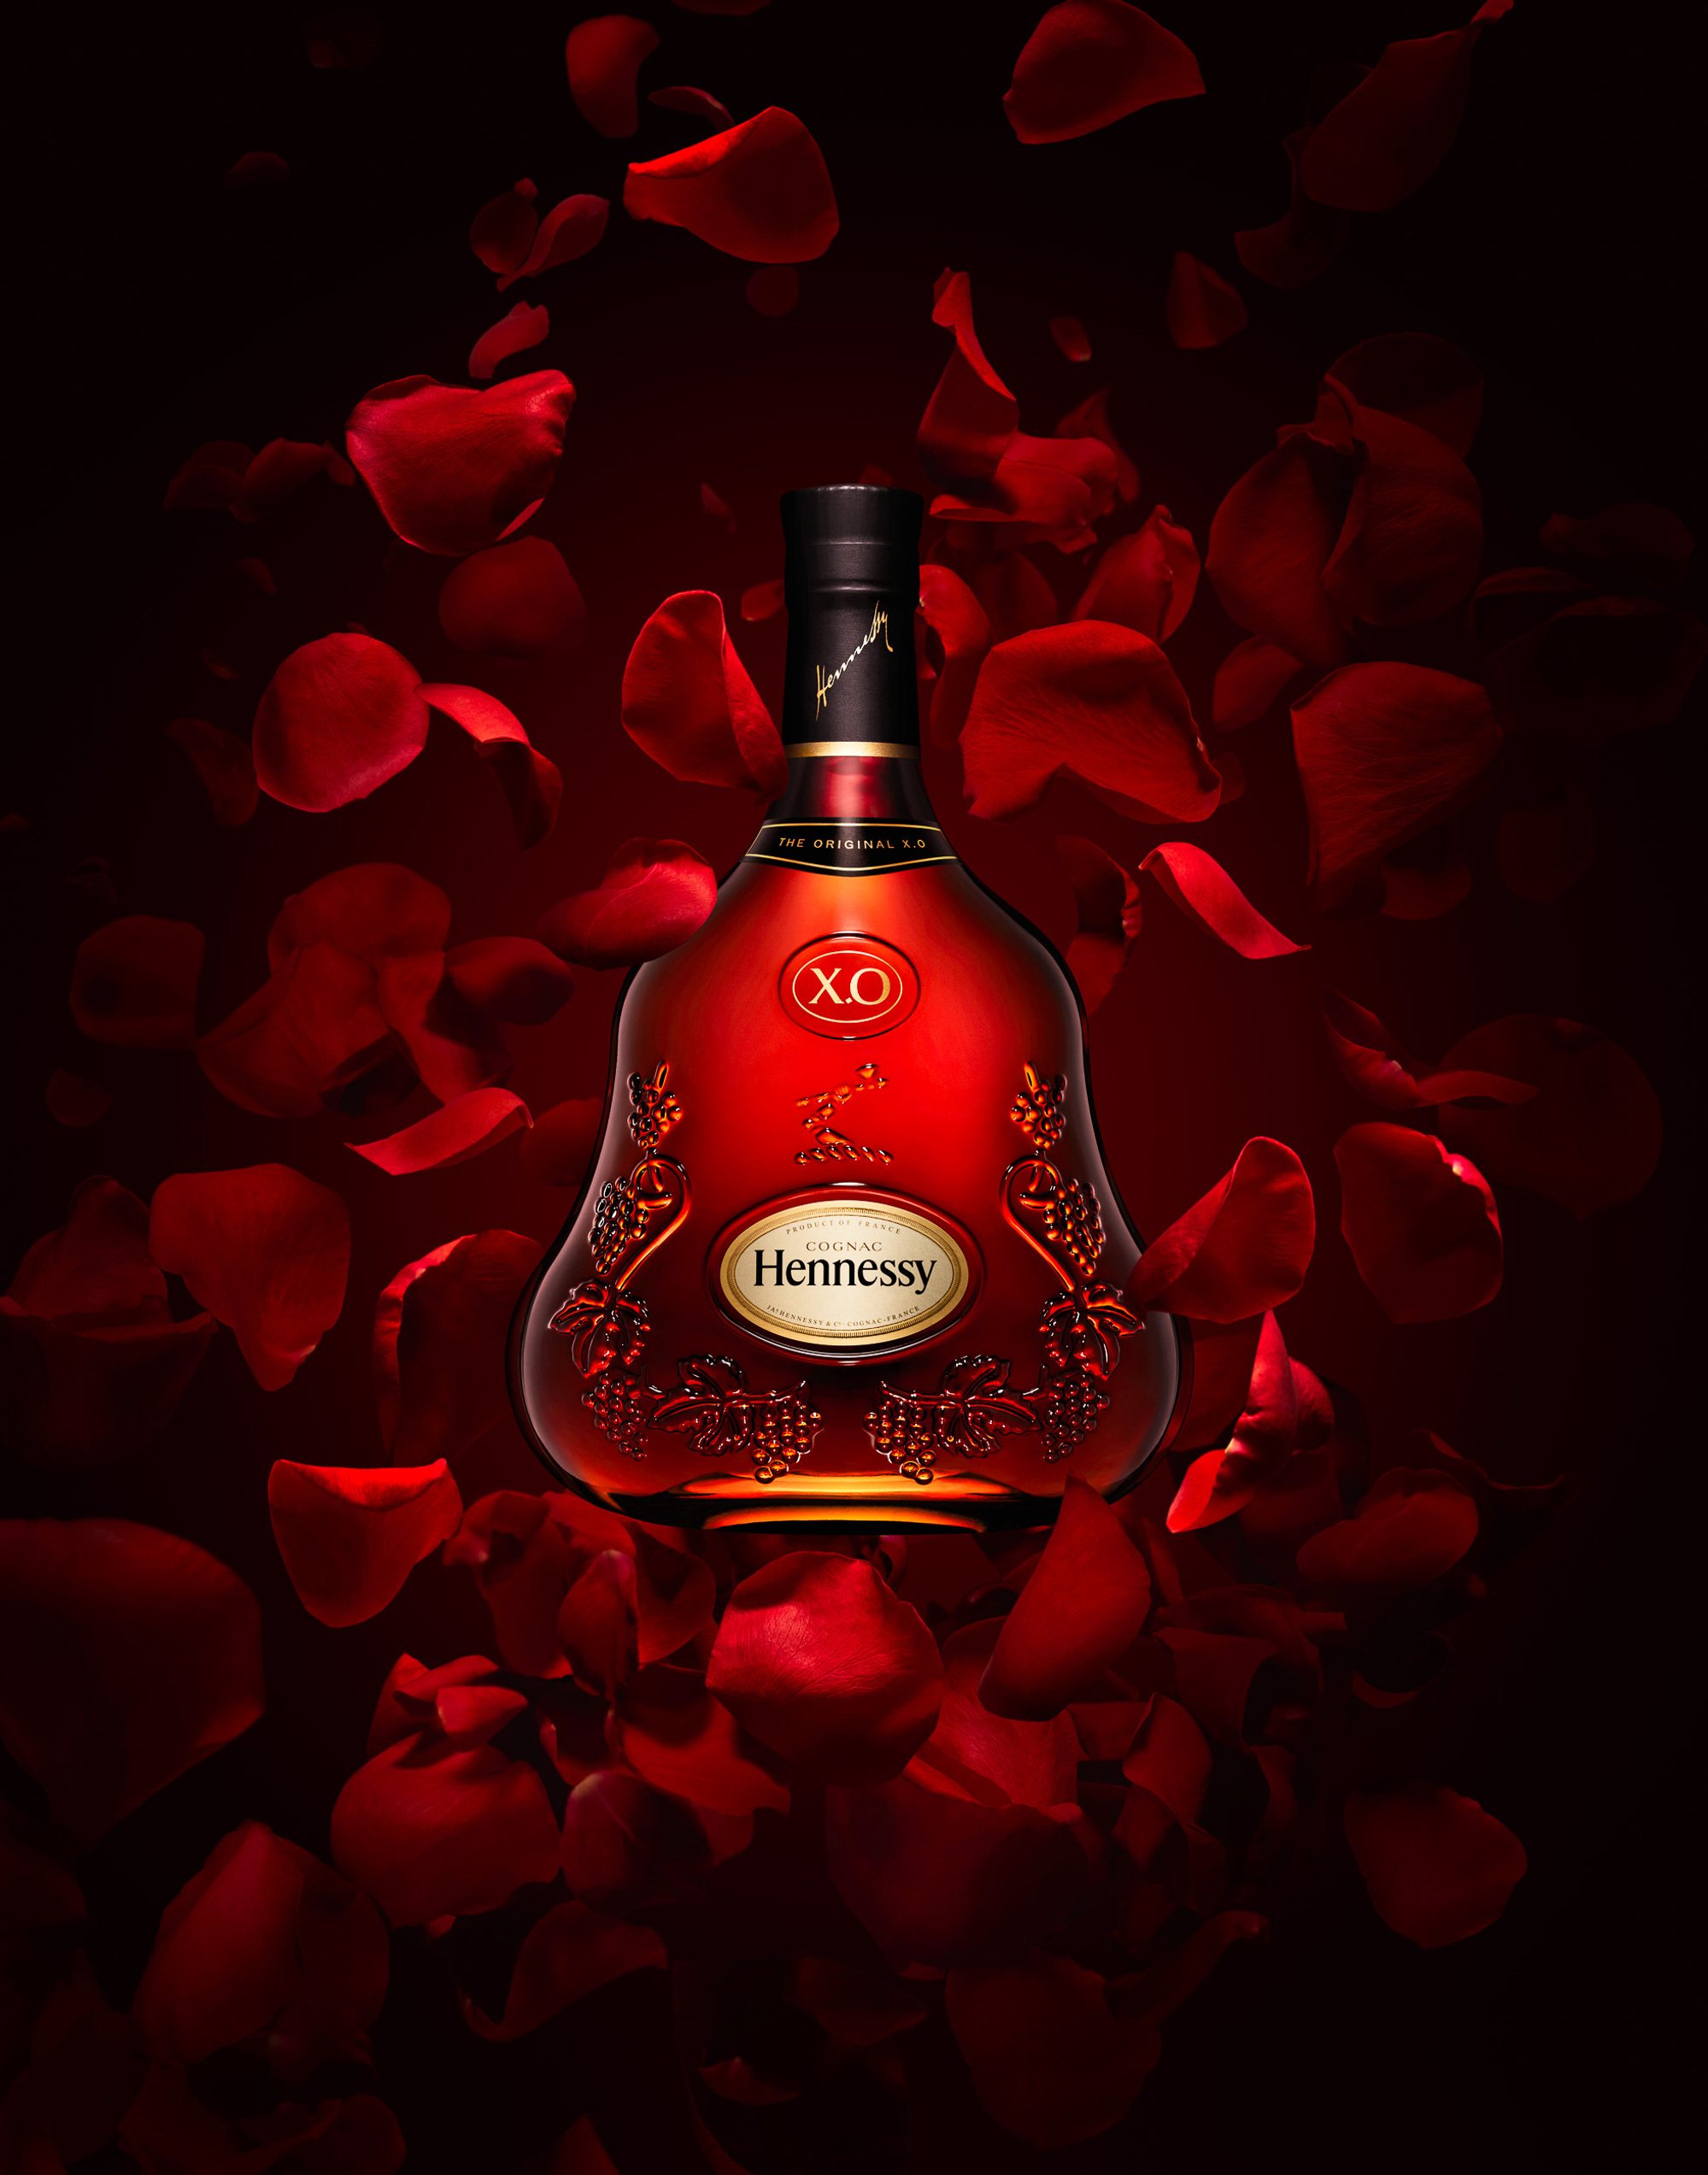 Bottle of Hennessy XO Cognac on deep red background with floating rose petals Beverages and alcohol product & advertising photography by Timothy Hogan Studio in Los Angeles